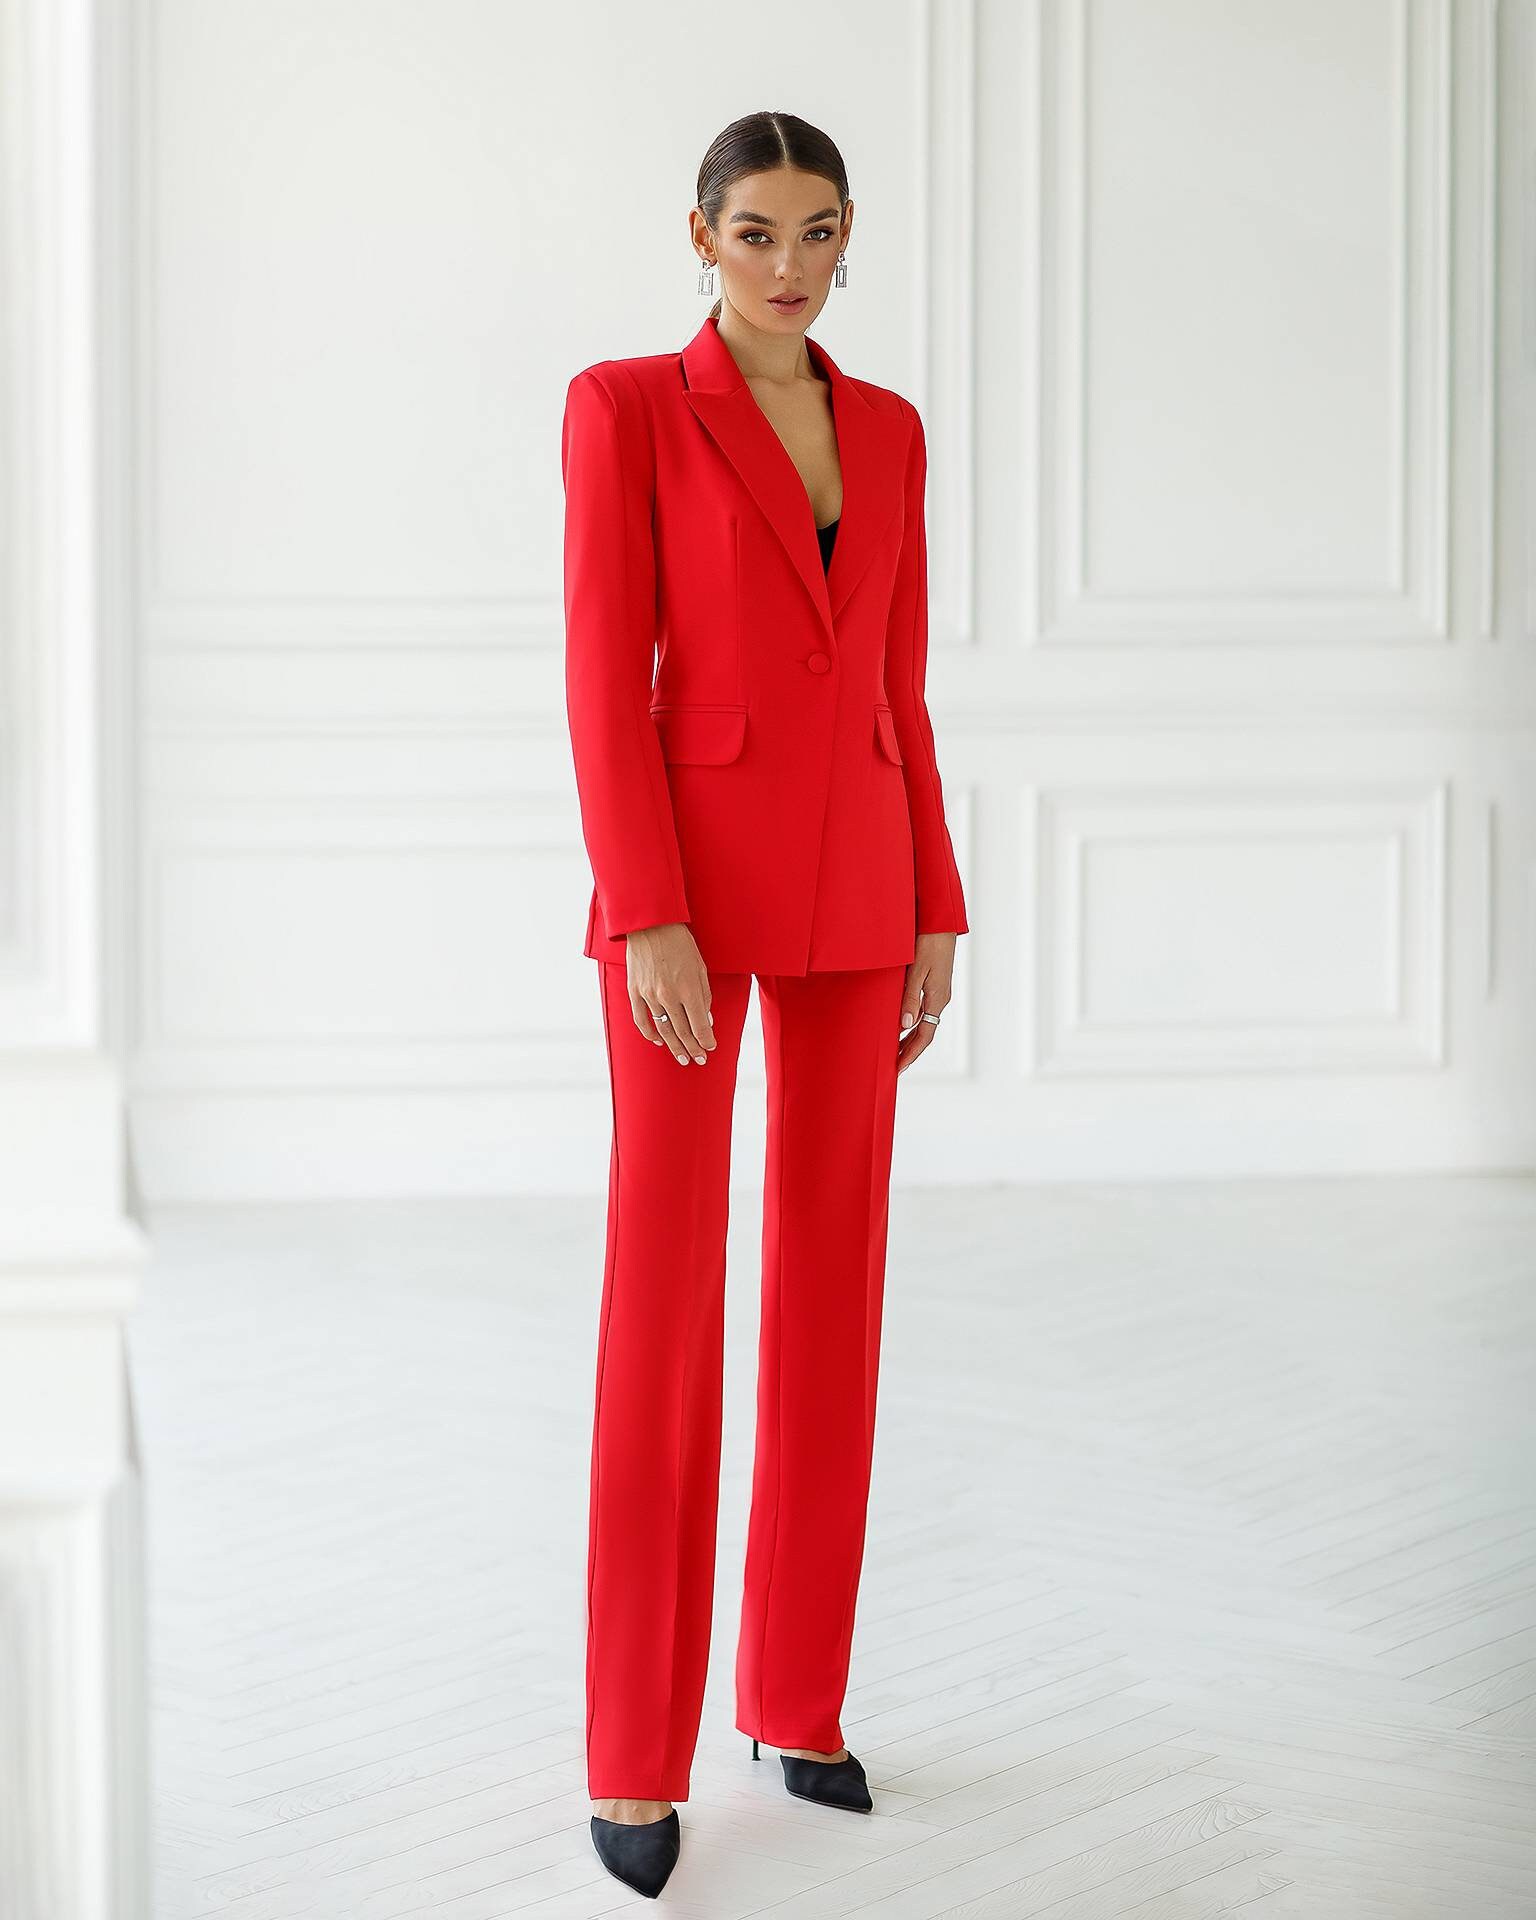 Red Suit Jacket Womens, Formal Pantsuit for Women, Chic Womens Pants Suit,  Womens Blazer and Pants Set, Red Blazer Women, Red Womens Suit -  Canada